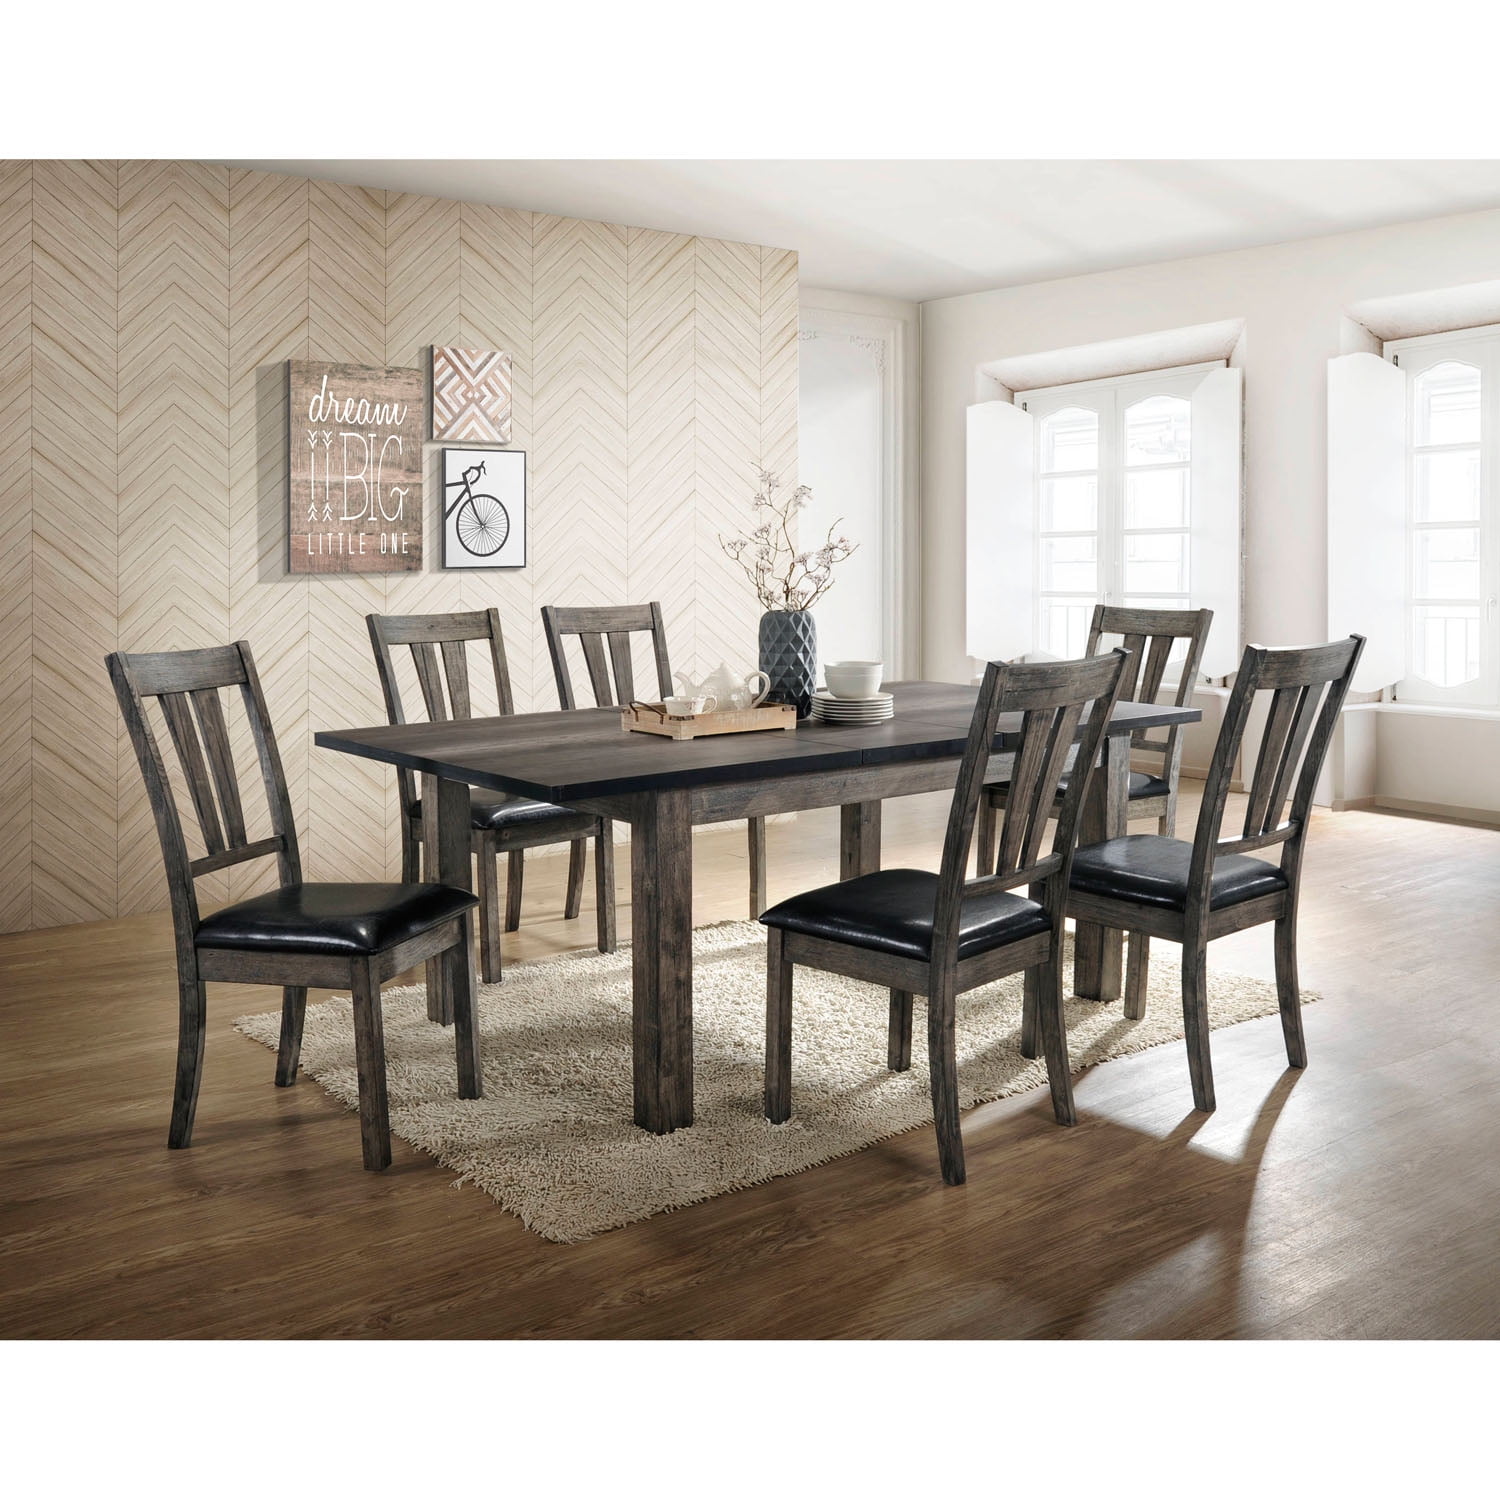 99001-pu7pc1-wg 30 X 78 X 42 In. Drexel Dining Table With 6 Pu Side Chairs, 7 Piece